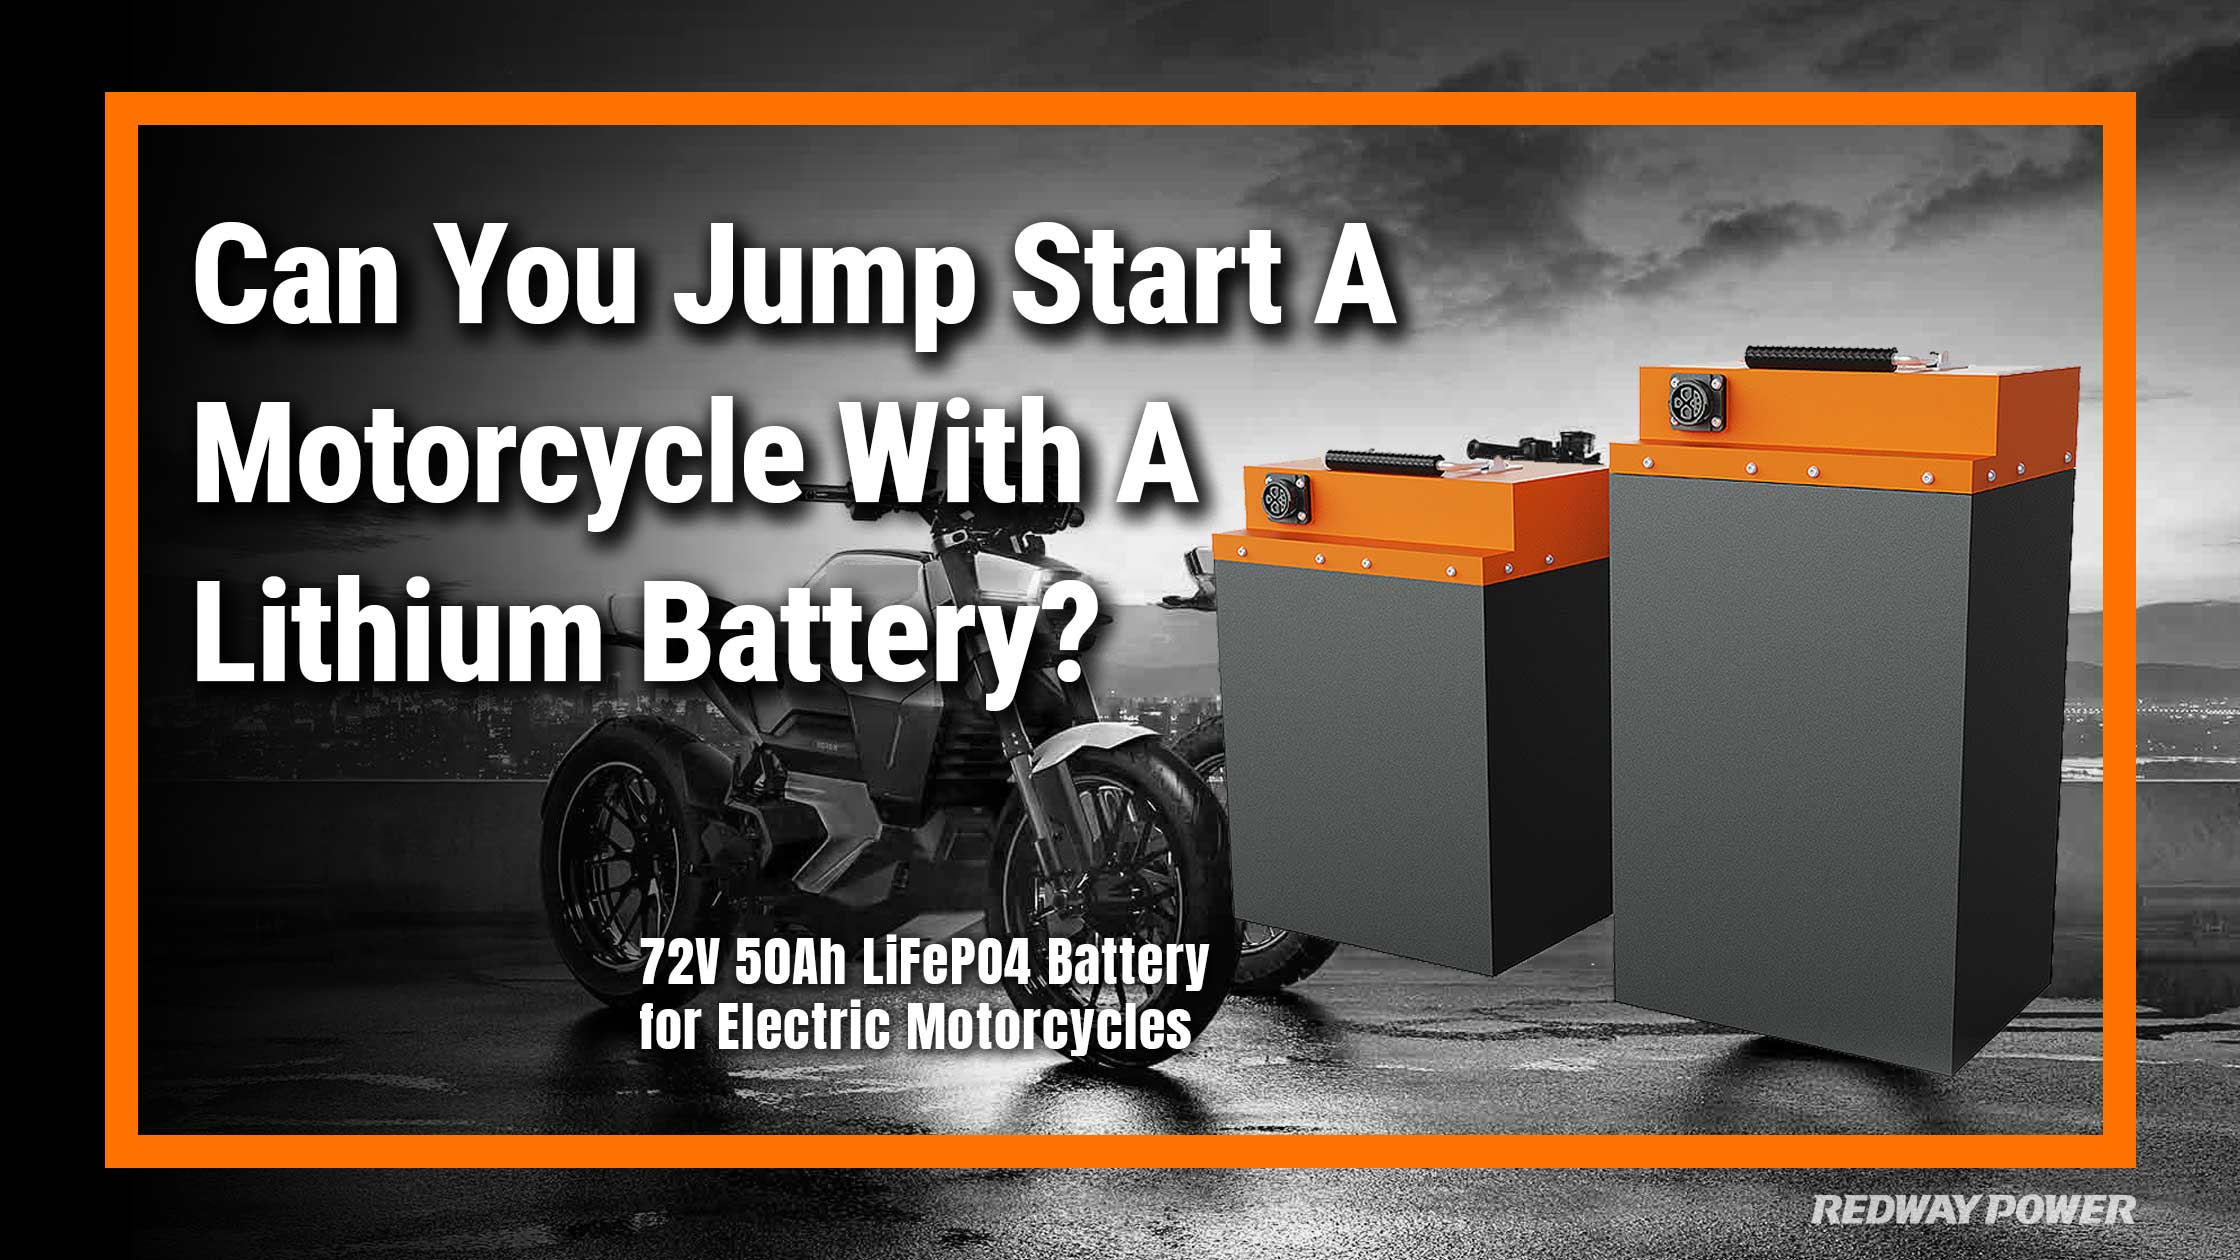 Can You Jump Start A Motorcycle With A Lithium Battery 72v 50ah motorcycle lithium battery redway factory 72v 60ah